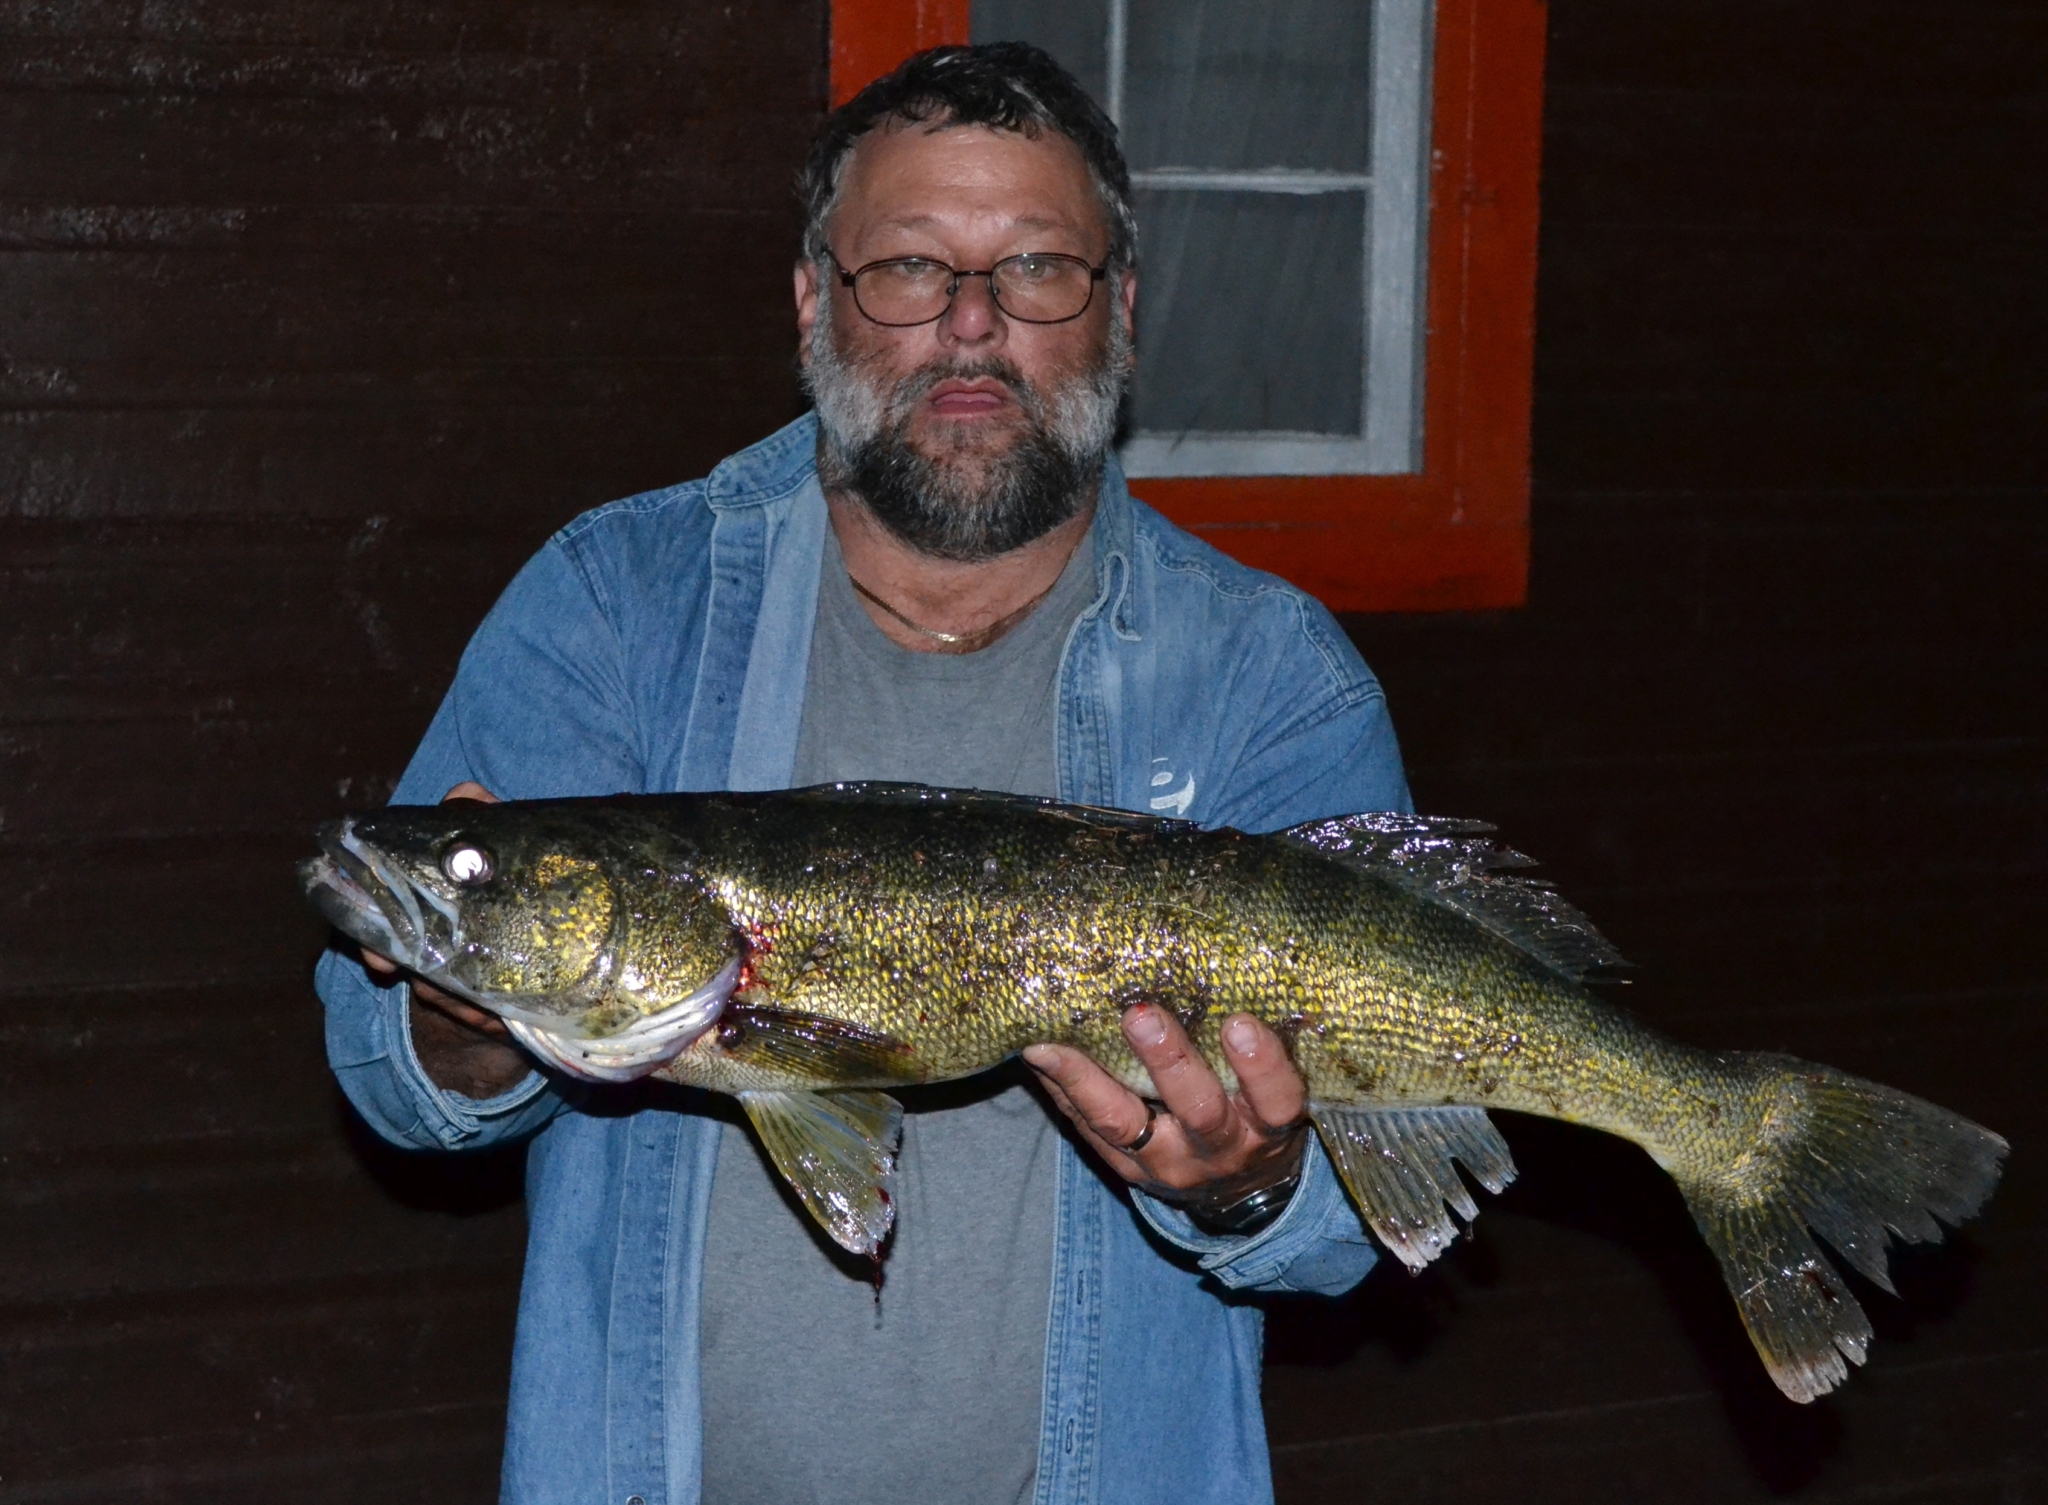 Mike holding 29 inch walleye.